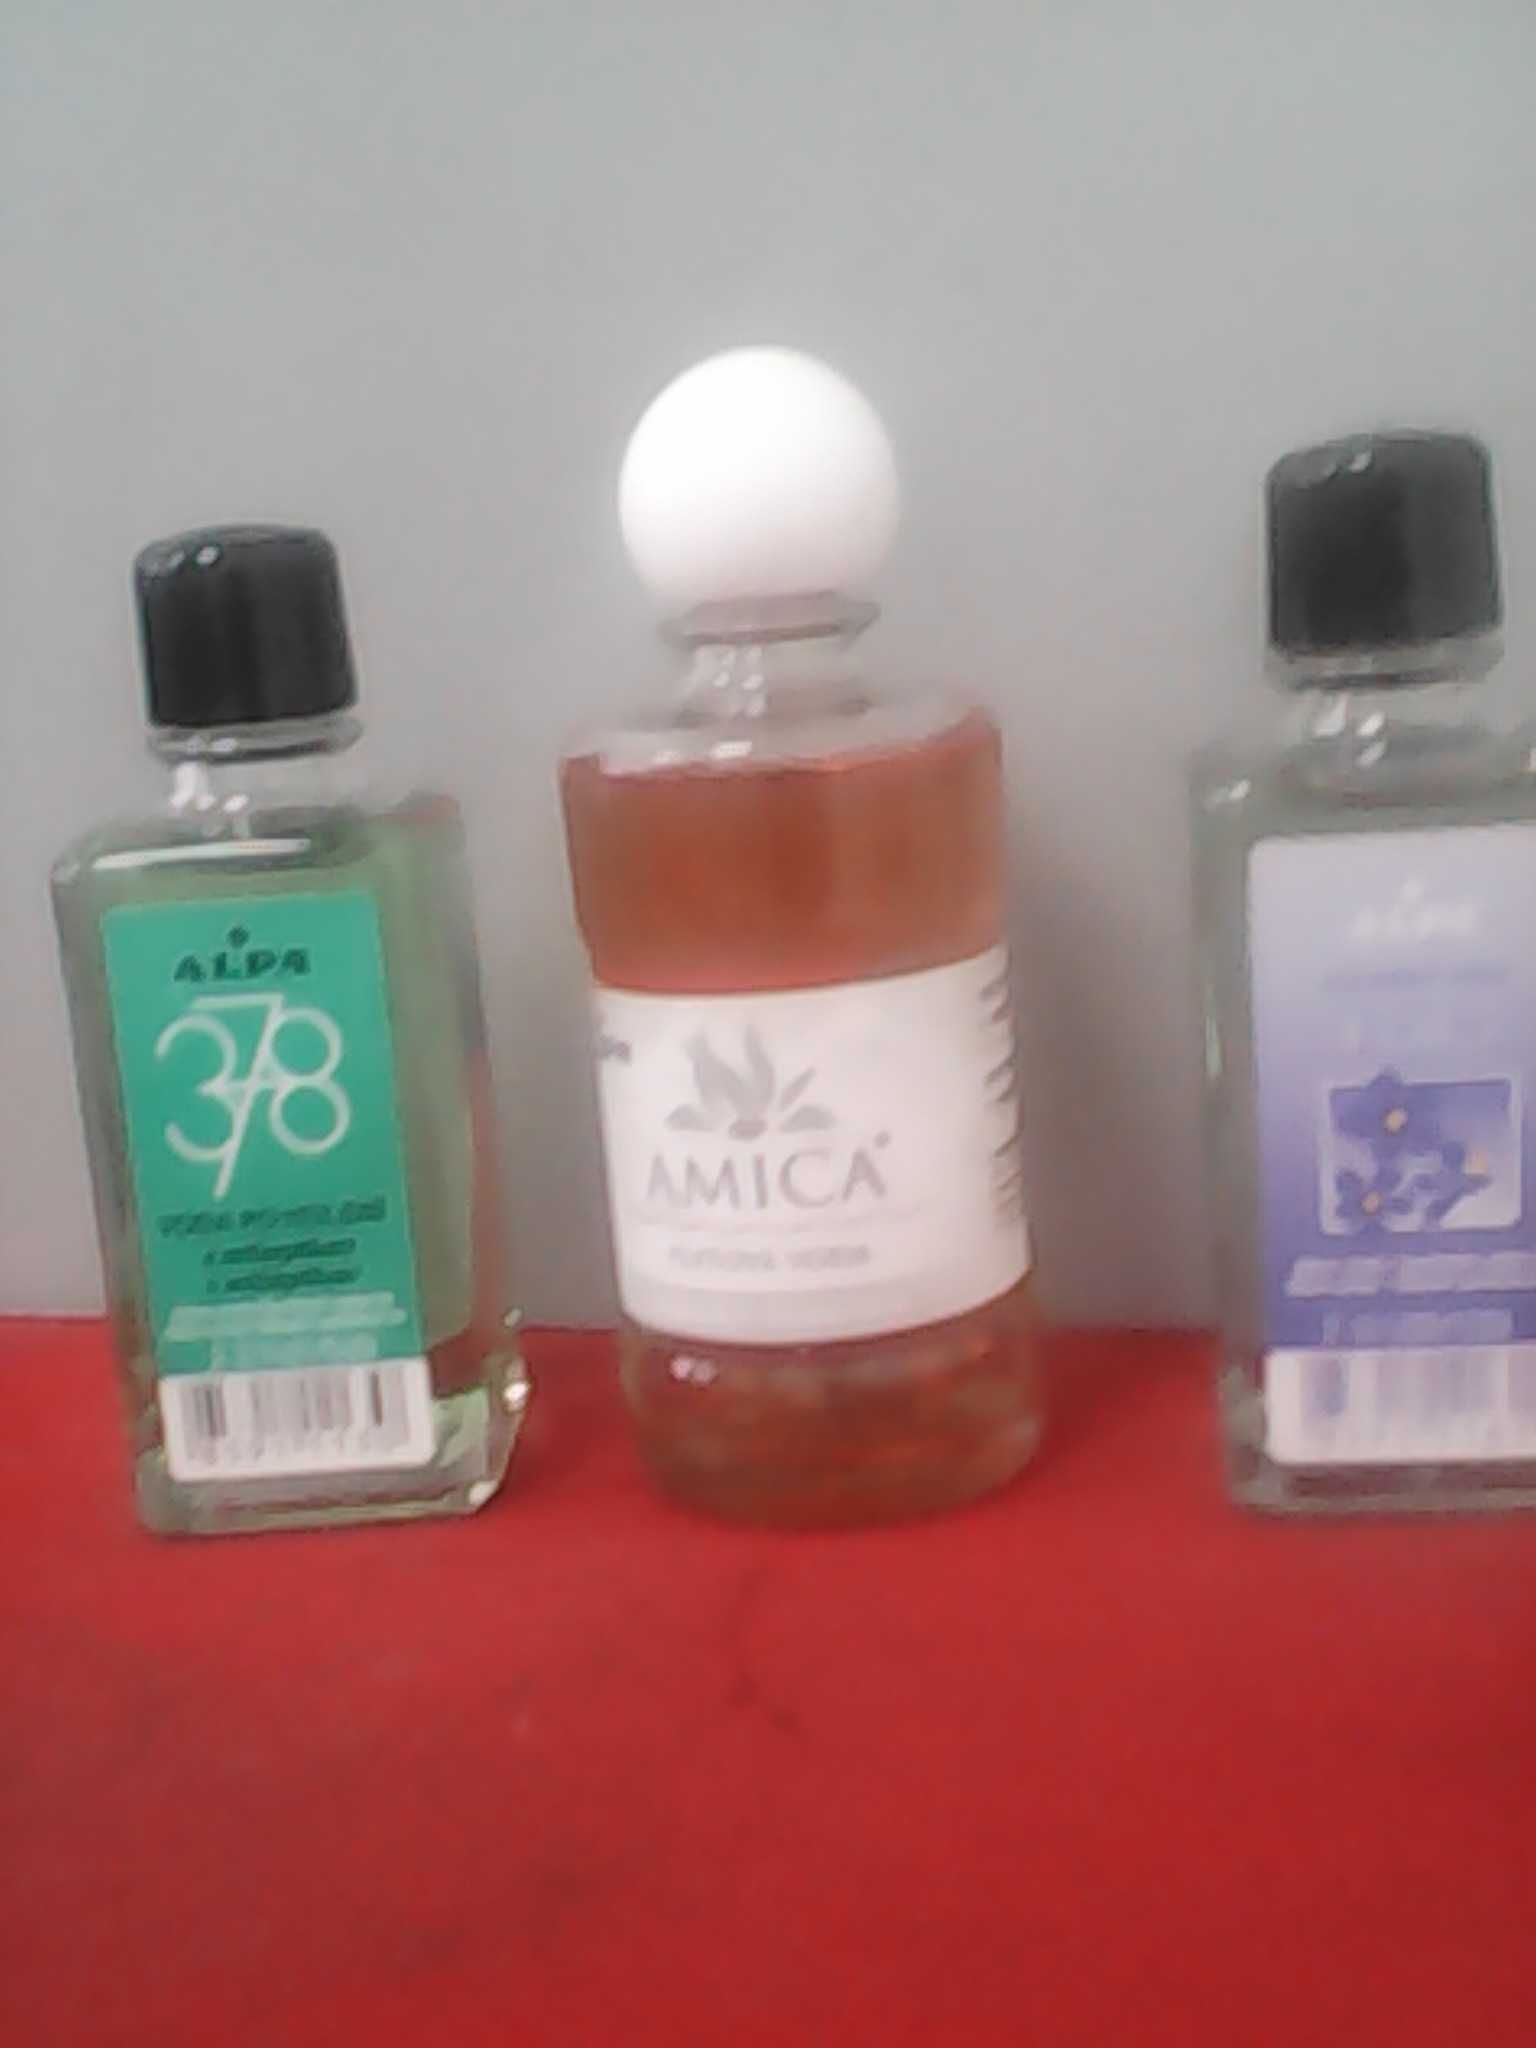 After-Shave  ALPA  AMICA+Fialka+ 378  set 3 buc